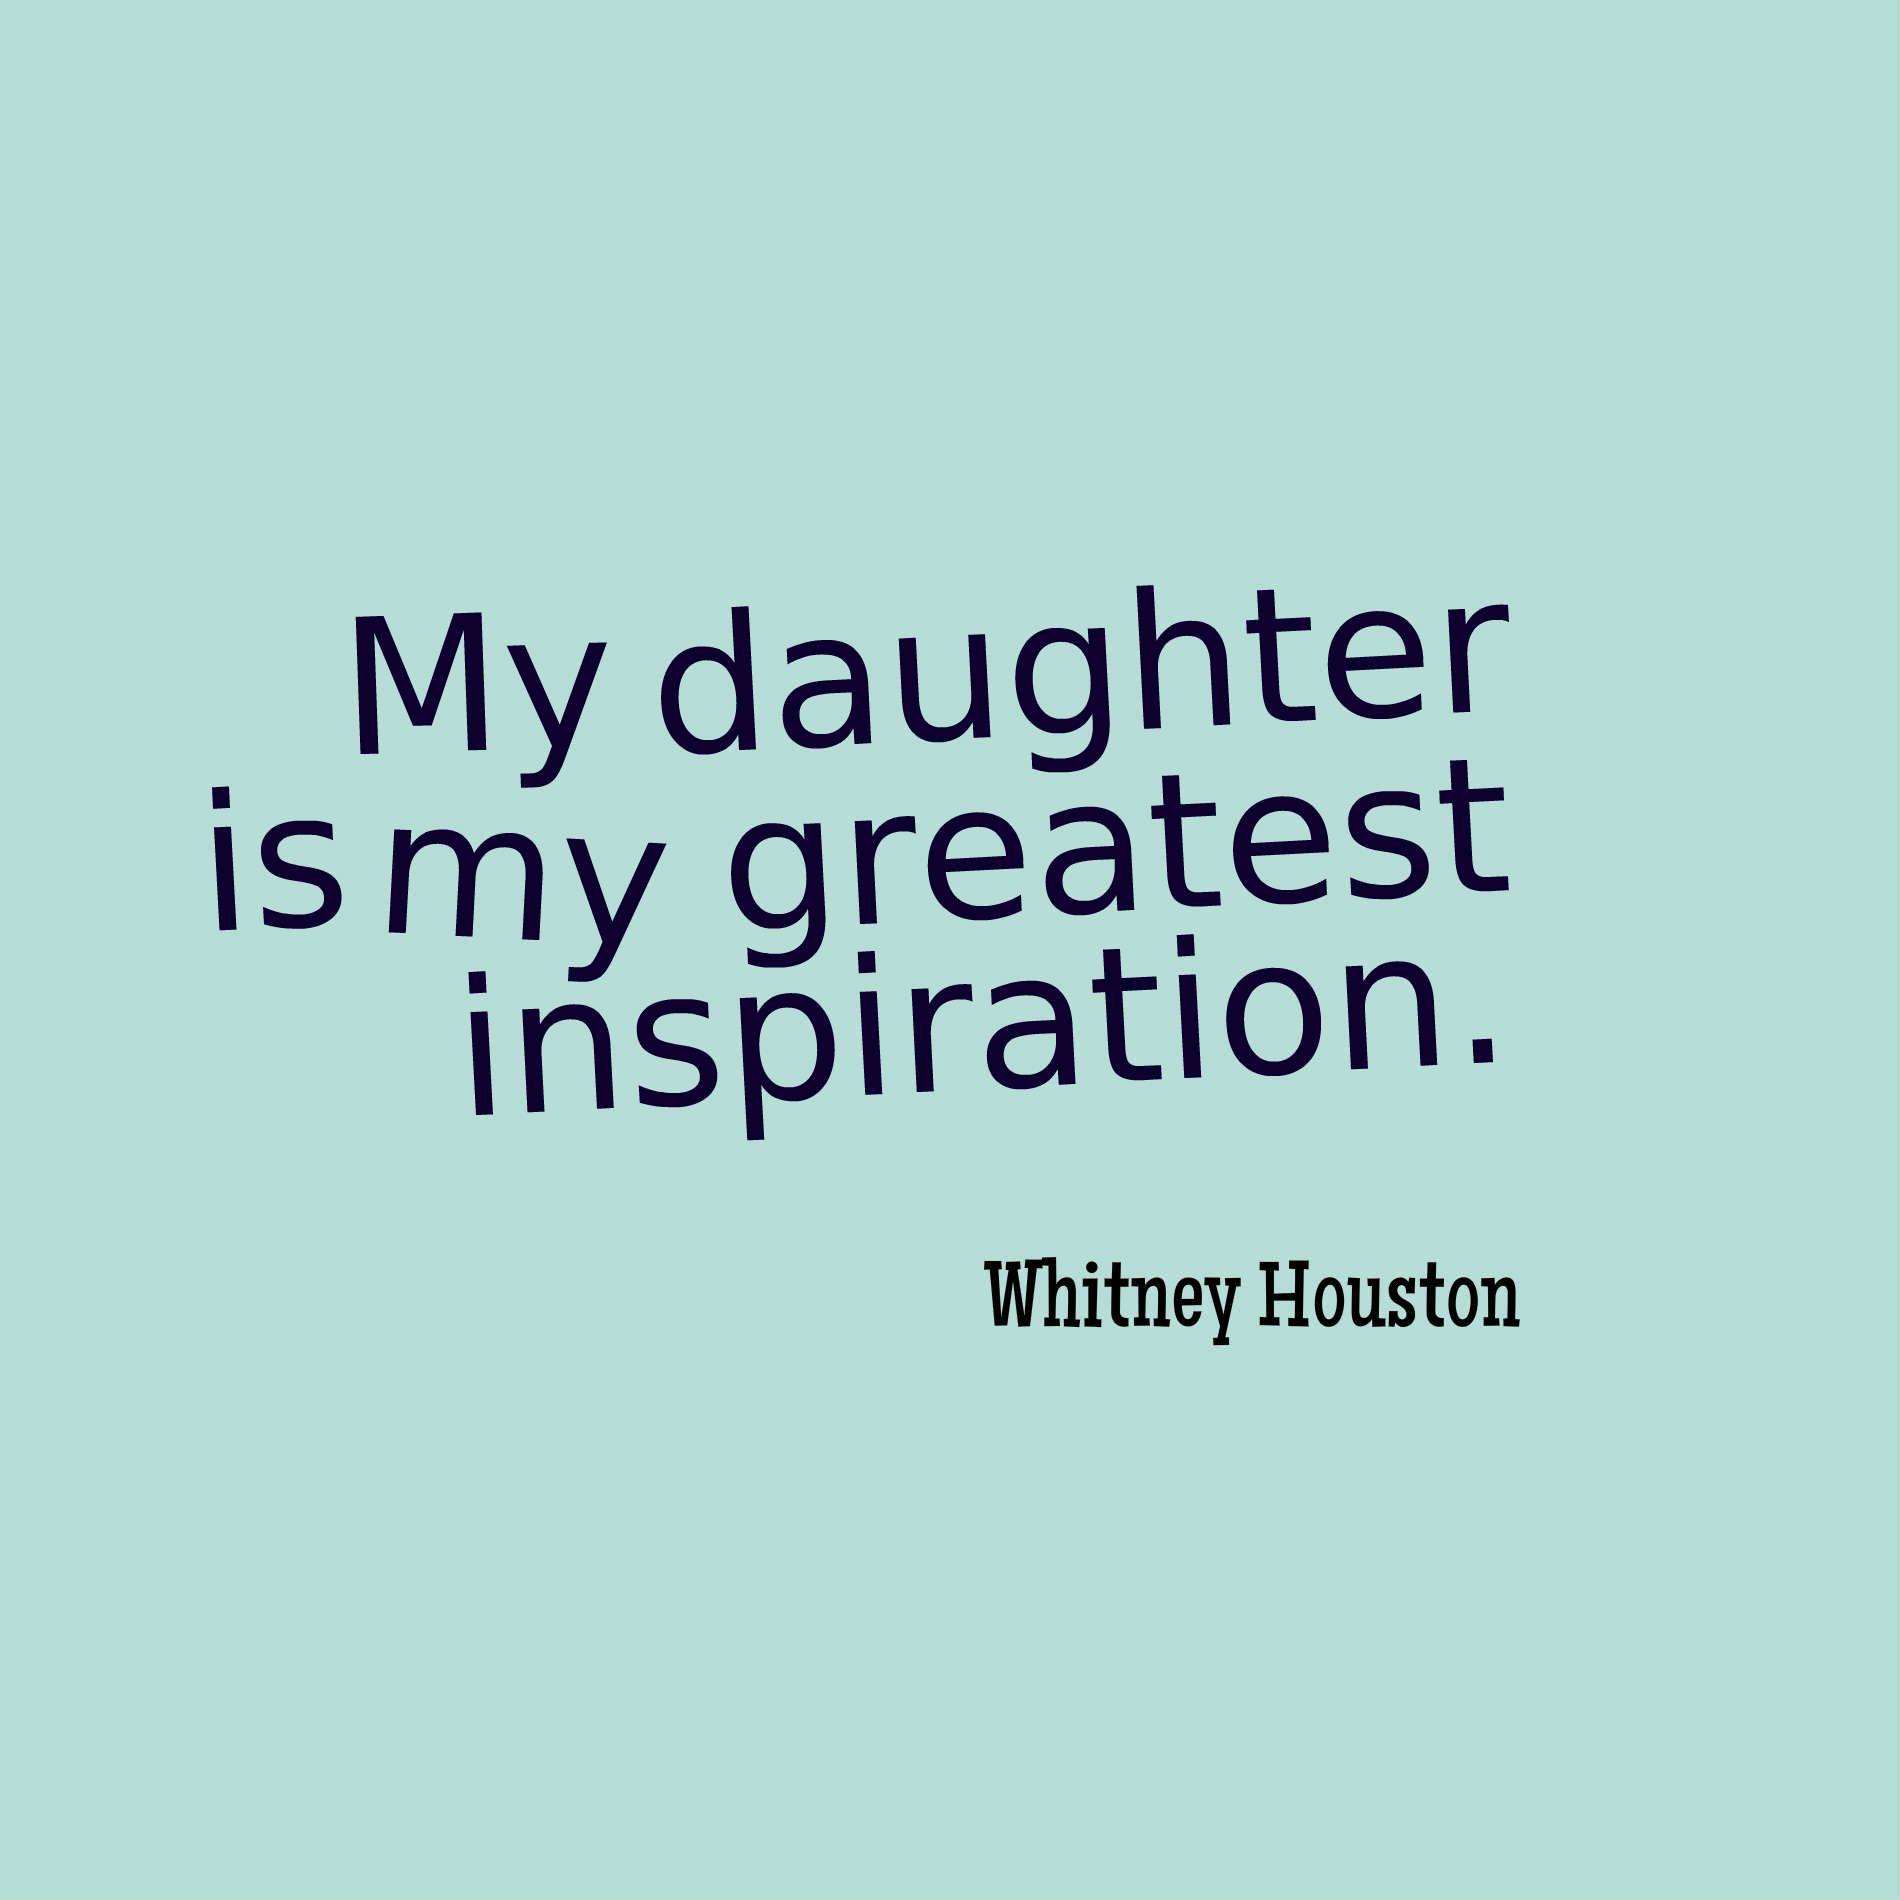 My daughter is my greatest inspiration.